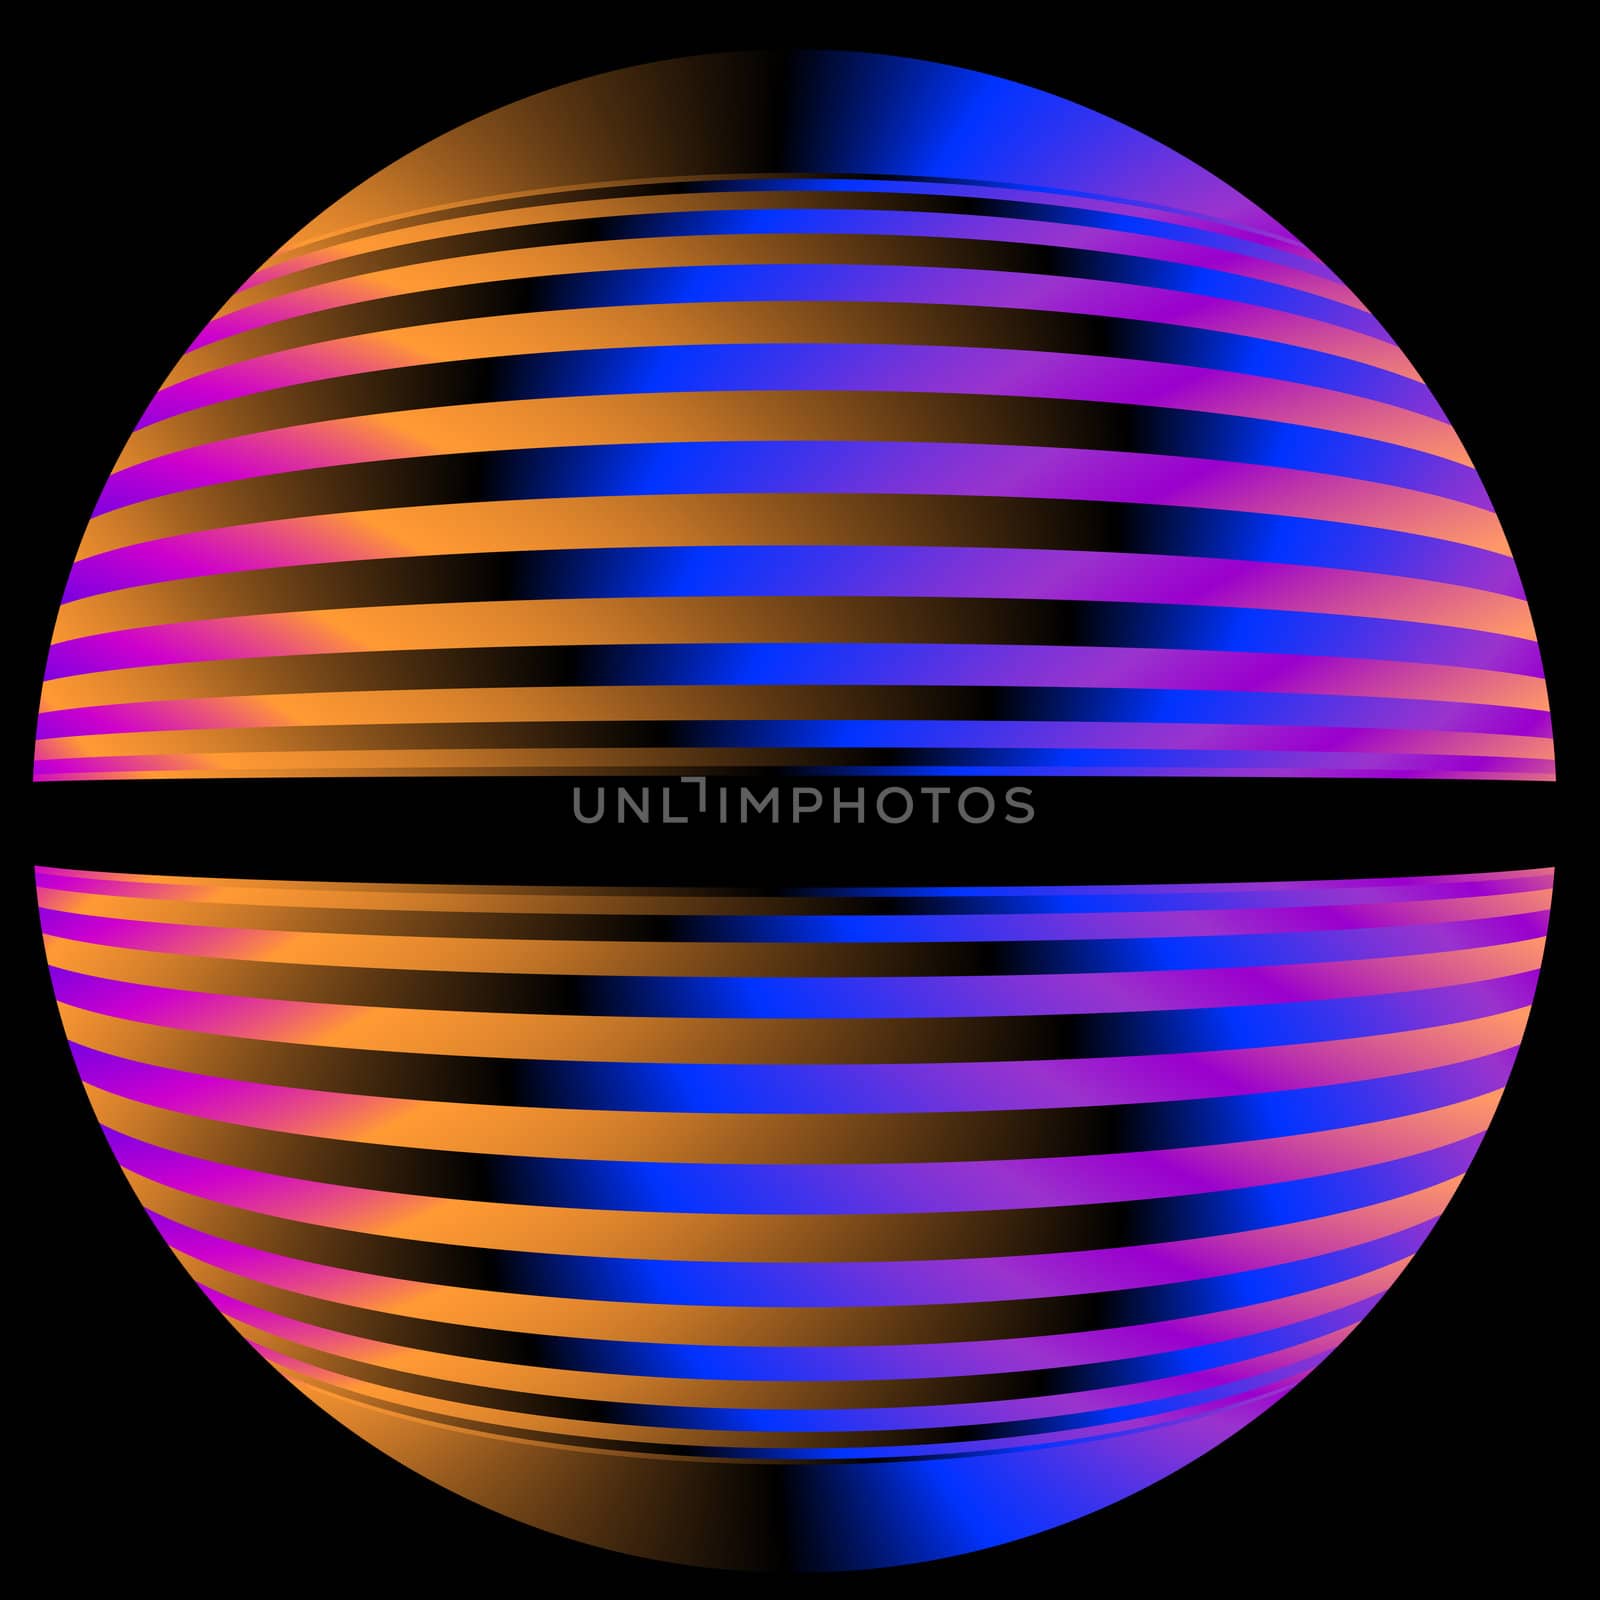 A fractal globe split in two hanging in space. It is done is bright shades of orange, pink, purple, and blue.